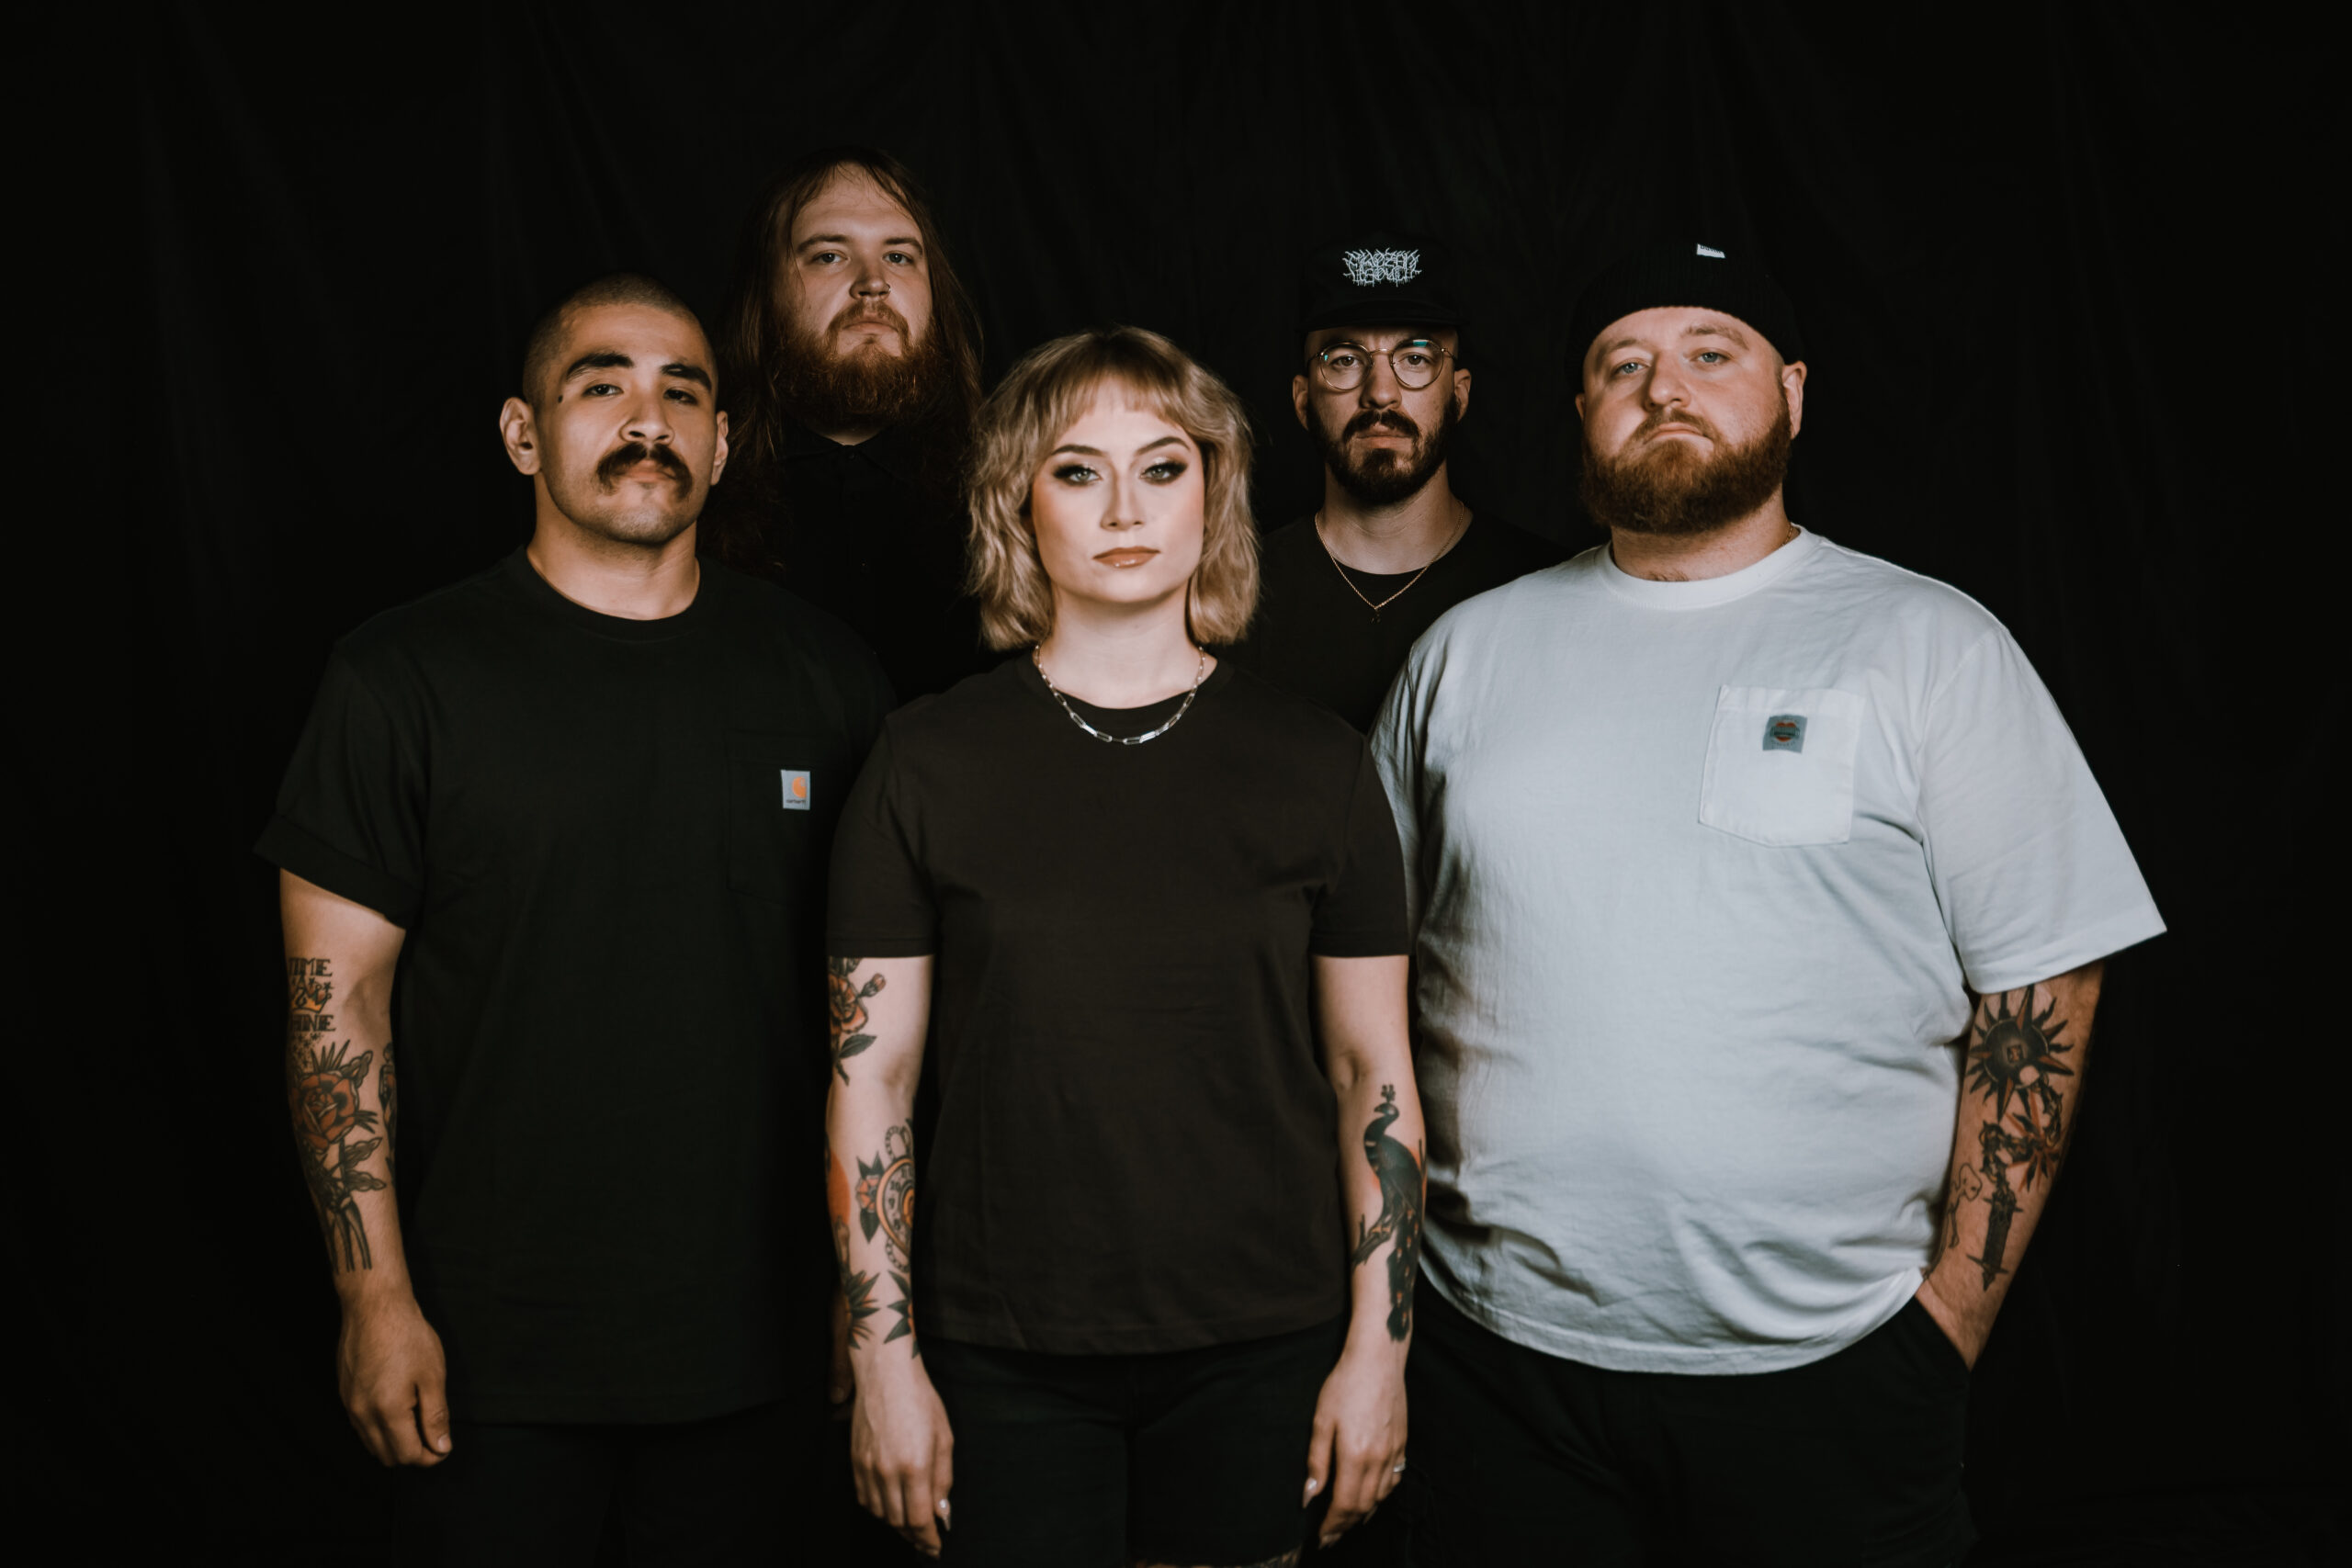 DYING WISH SHARE ‘LOST IN THE FALL’ VIDEO + NEW ALBUM ‘SYMPTOMS OF SURVIVAL’ OUT NOVEMBER 3